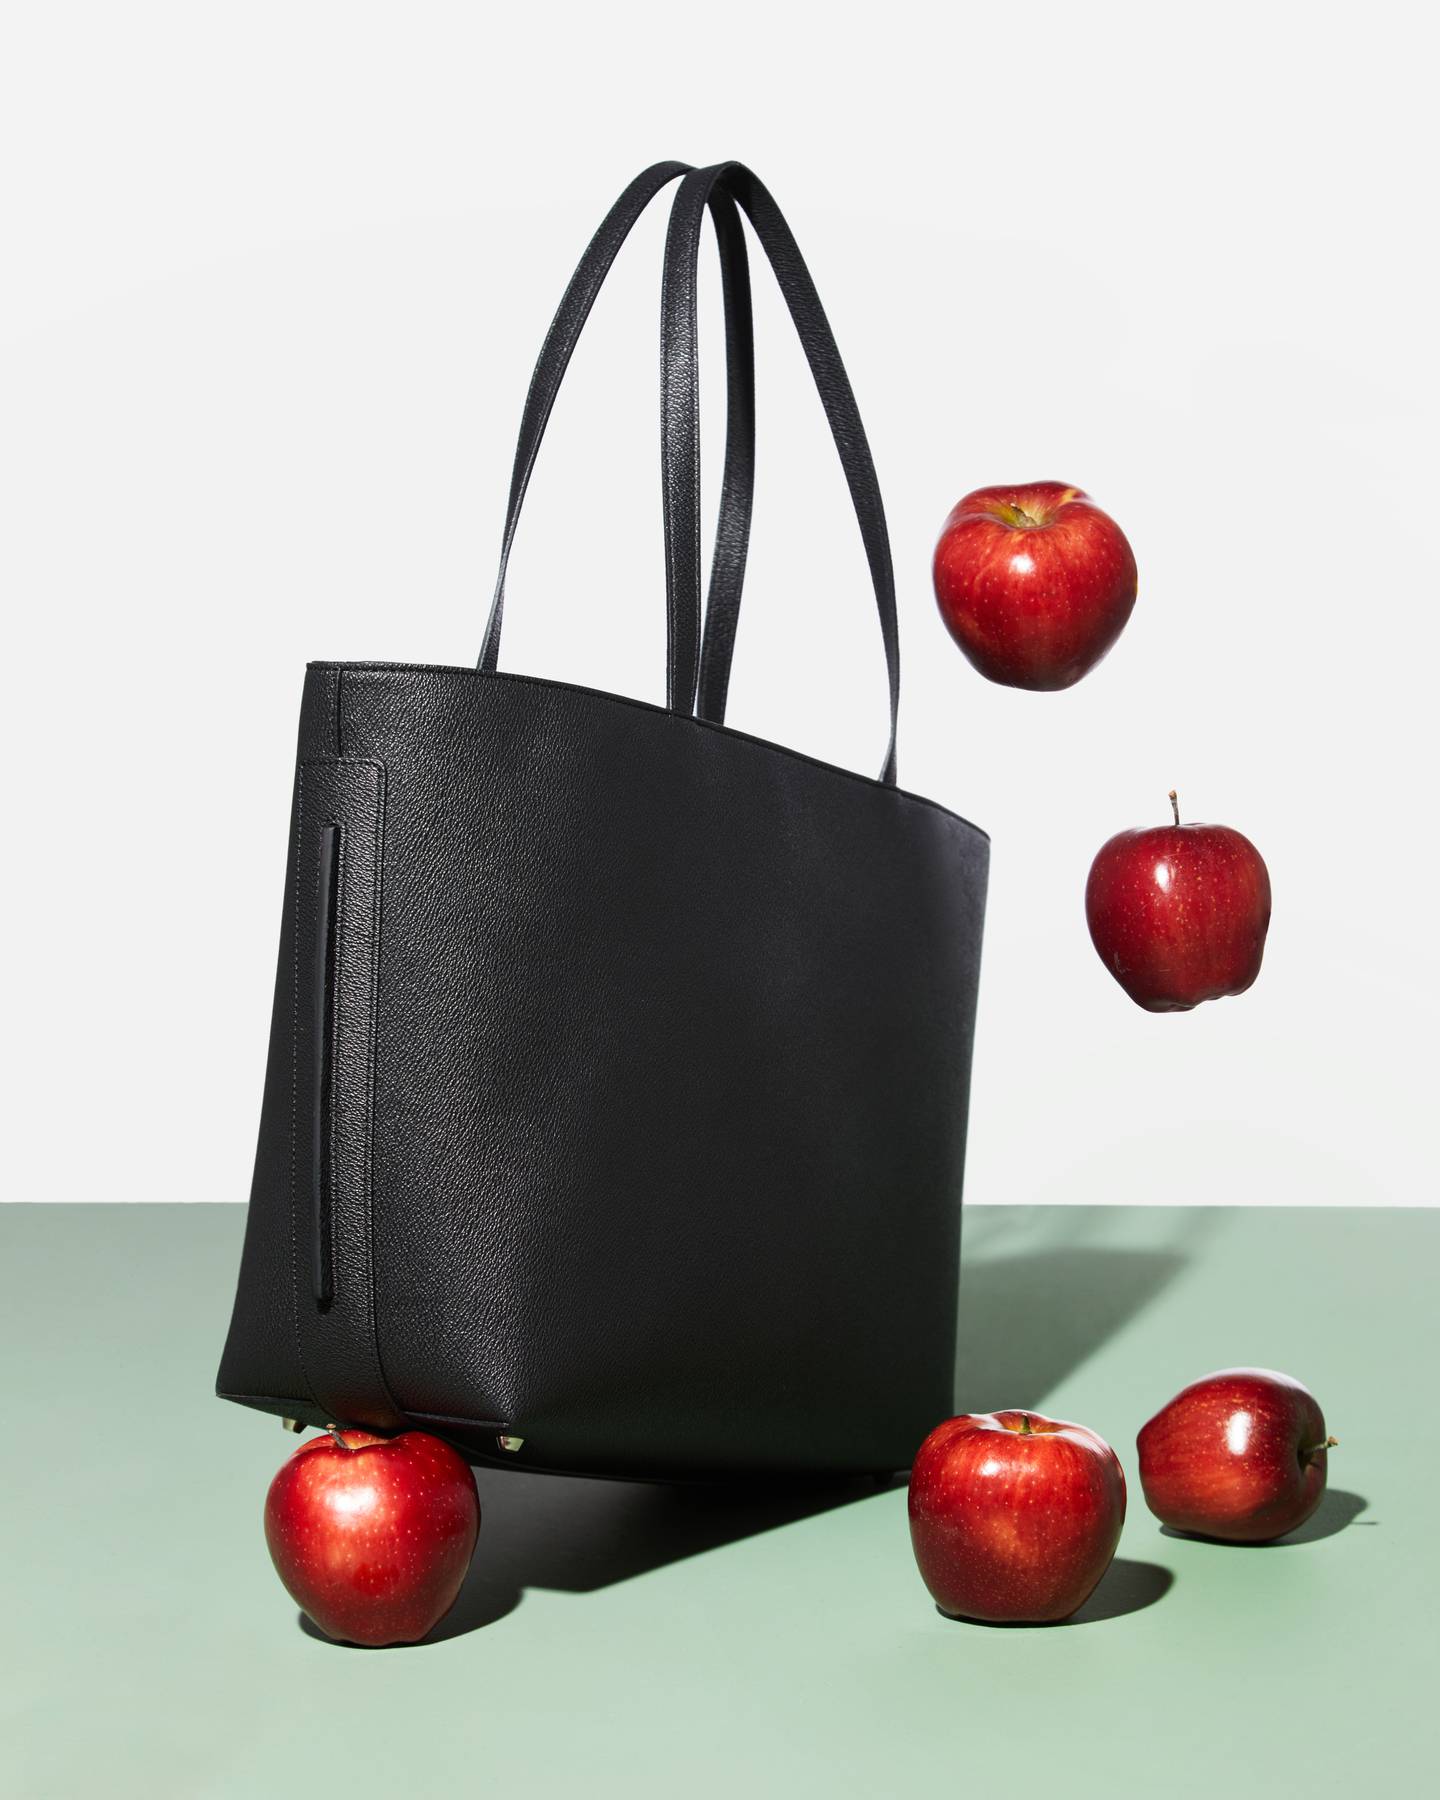 A Luxtra handbag made from apple skin leather.